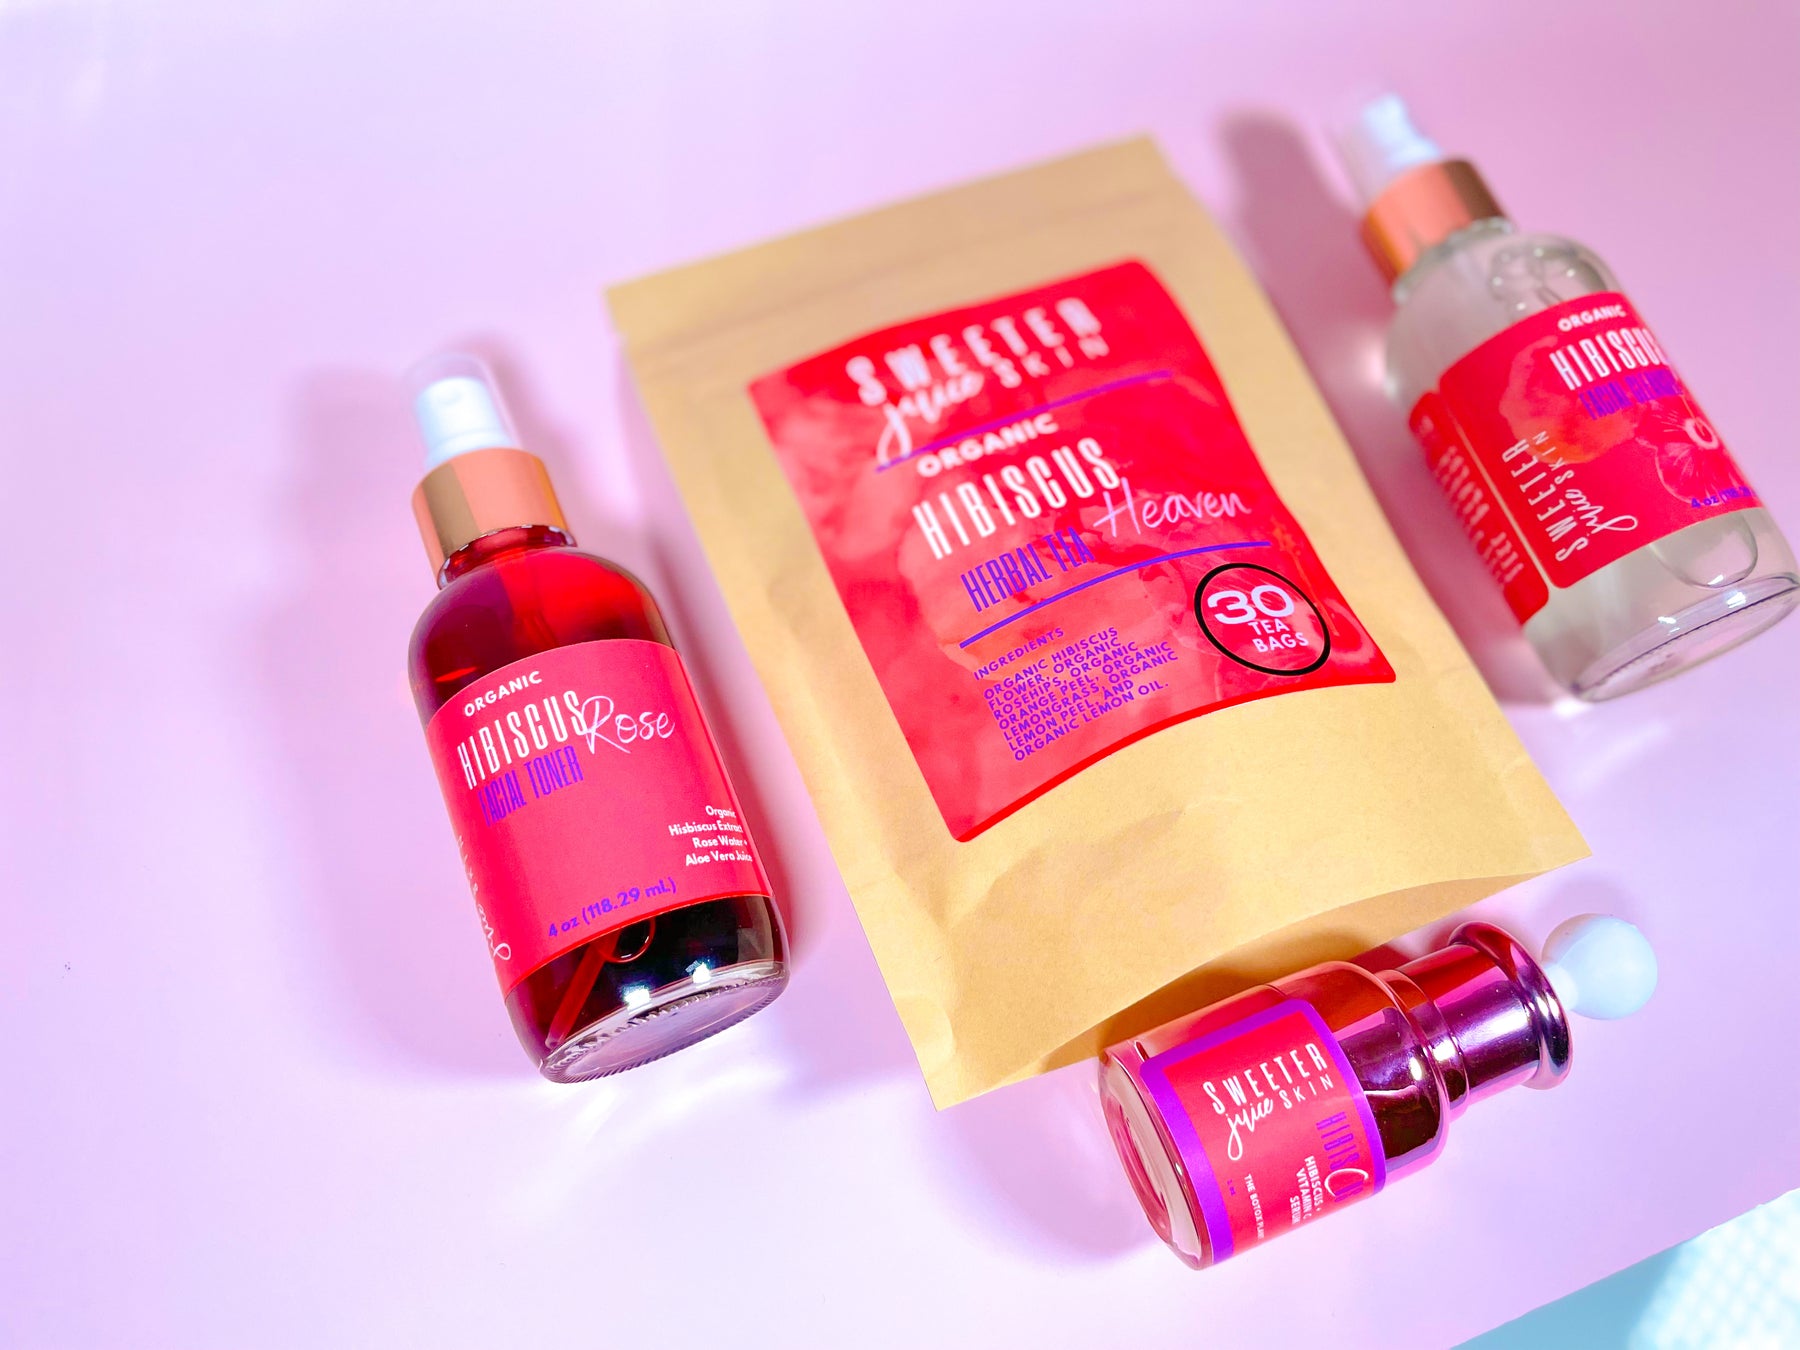 Hibiscus inner + outer beauty system by Sweeter Juice Skin